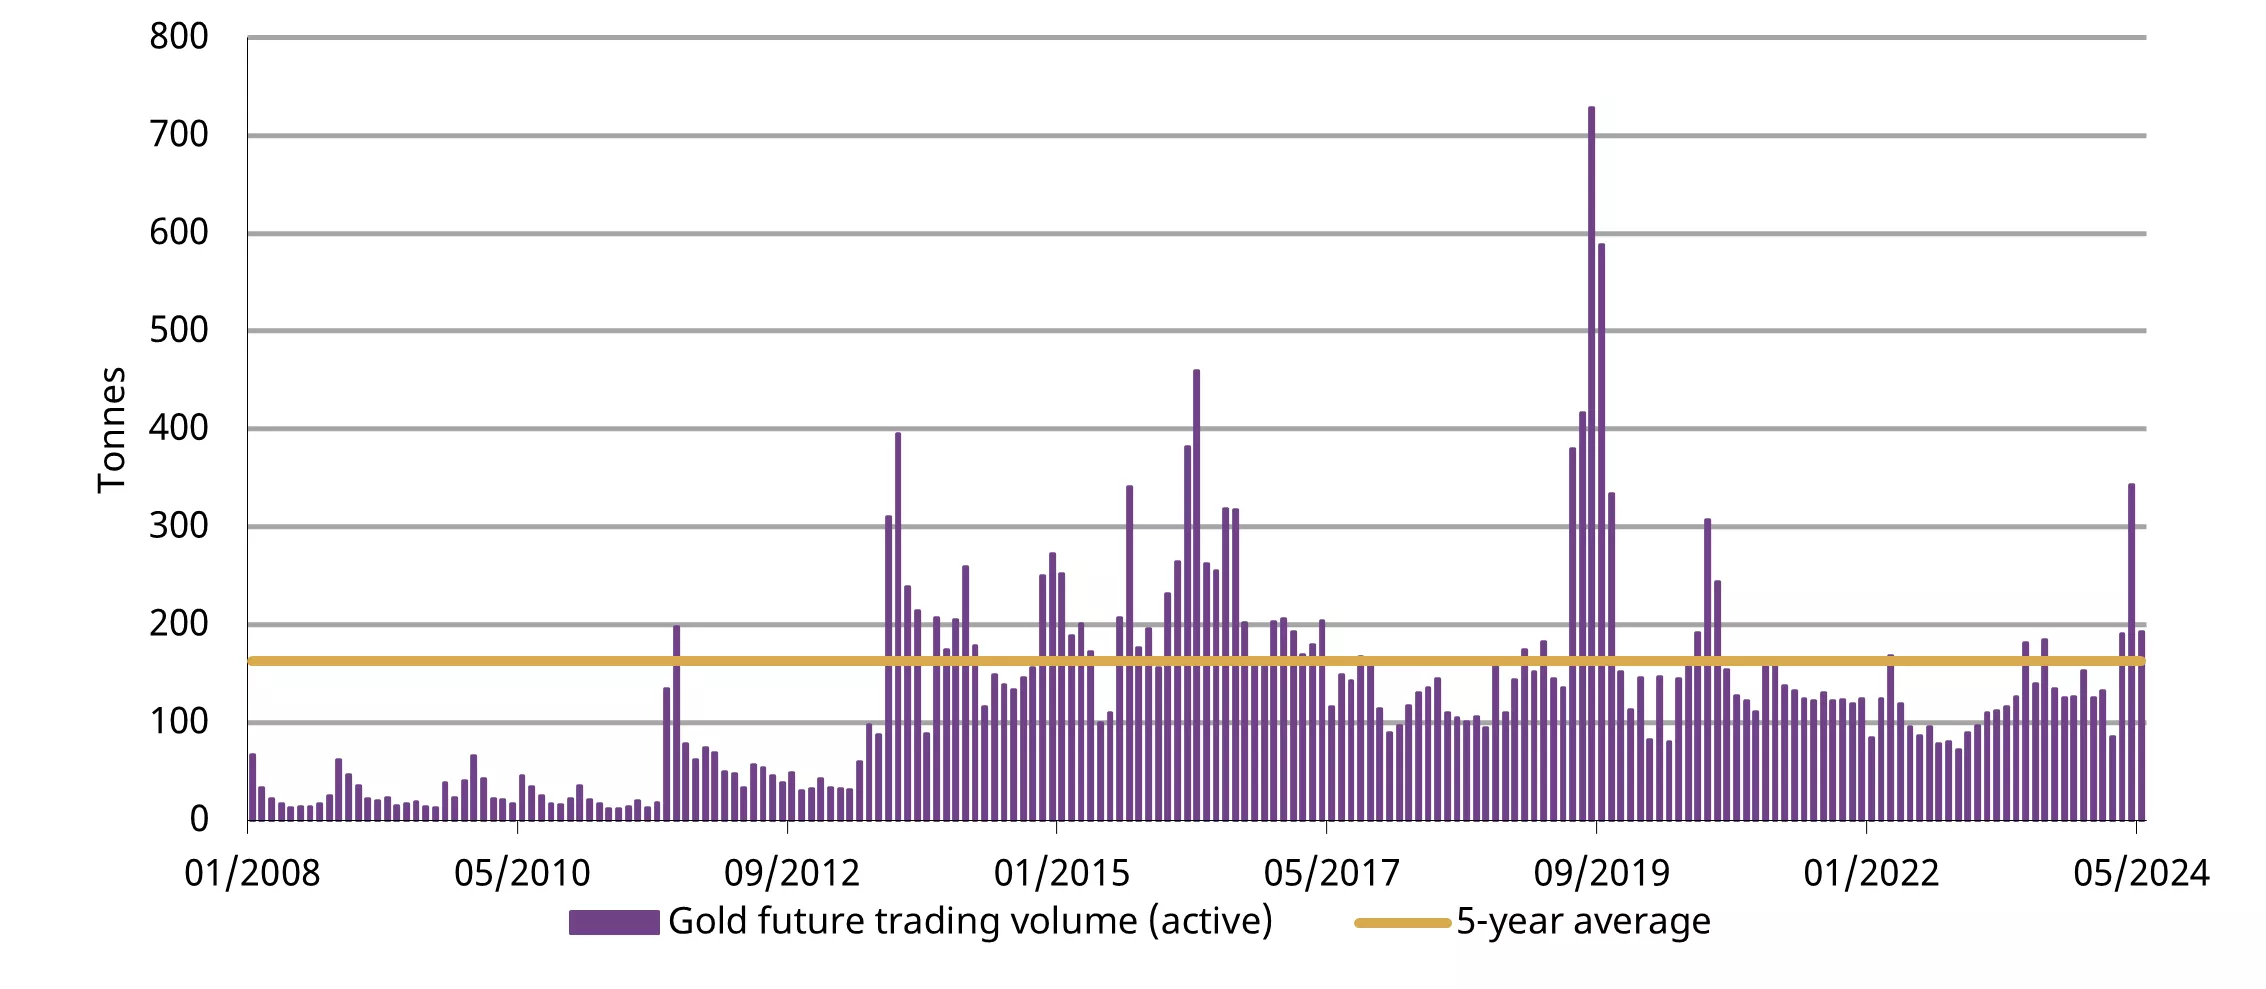 Gold future trading activities also cooled in May